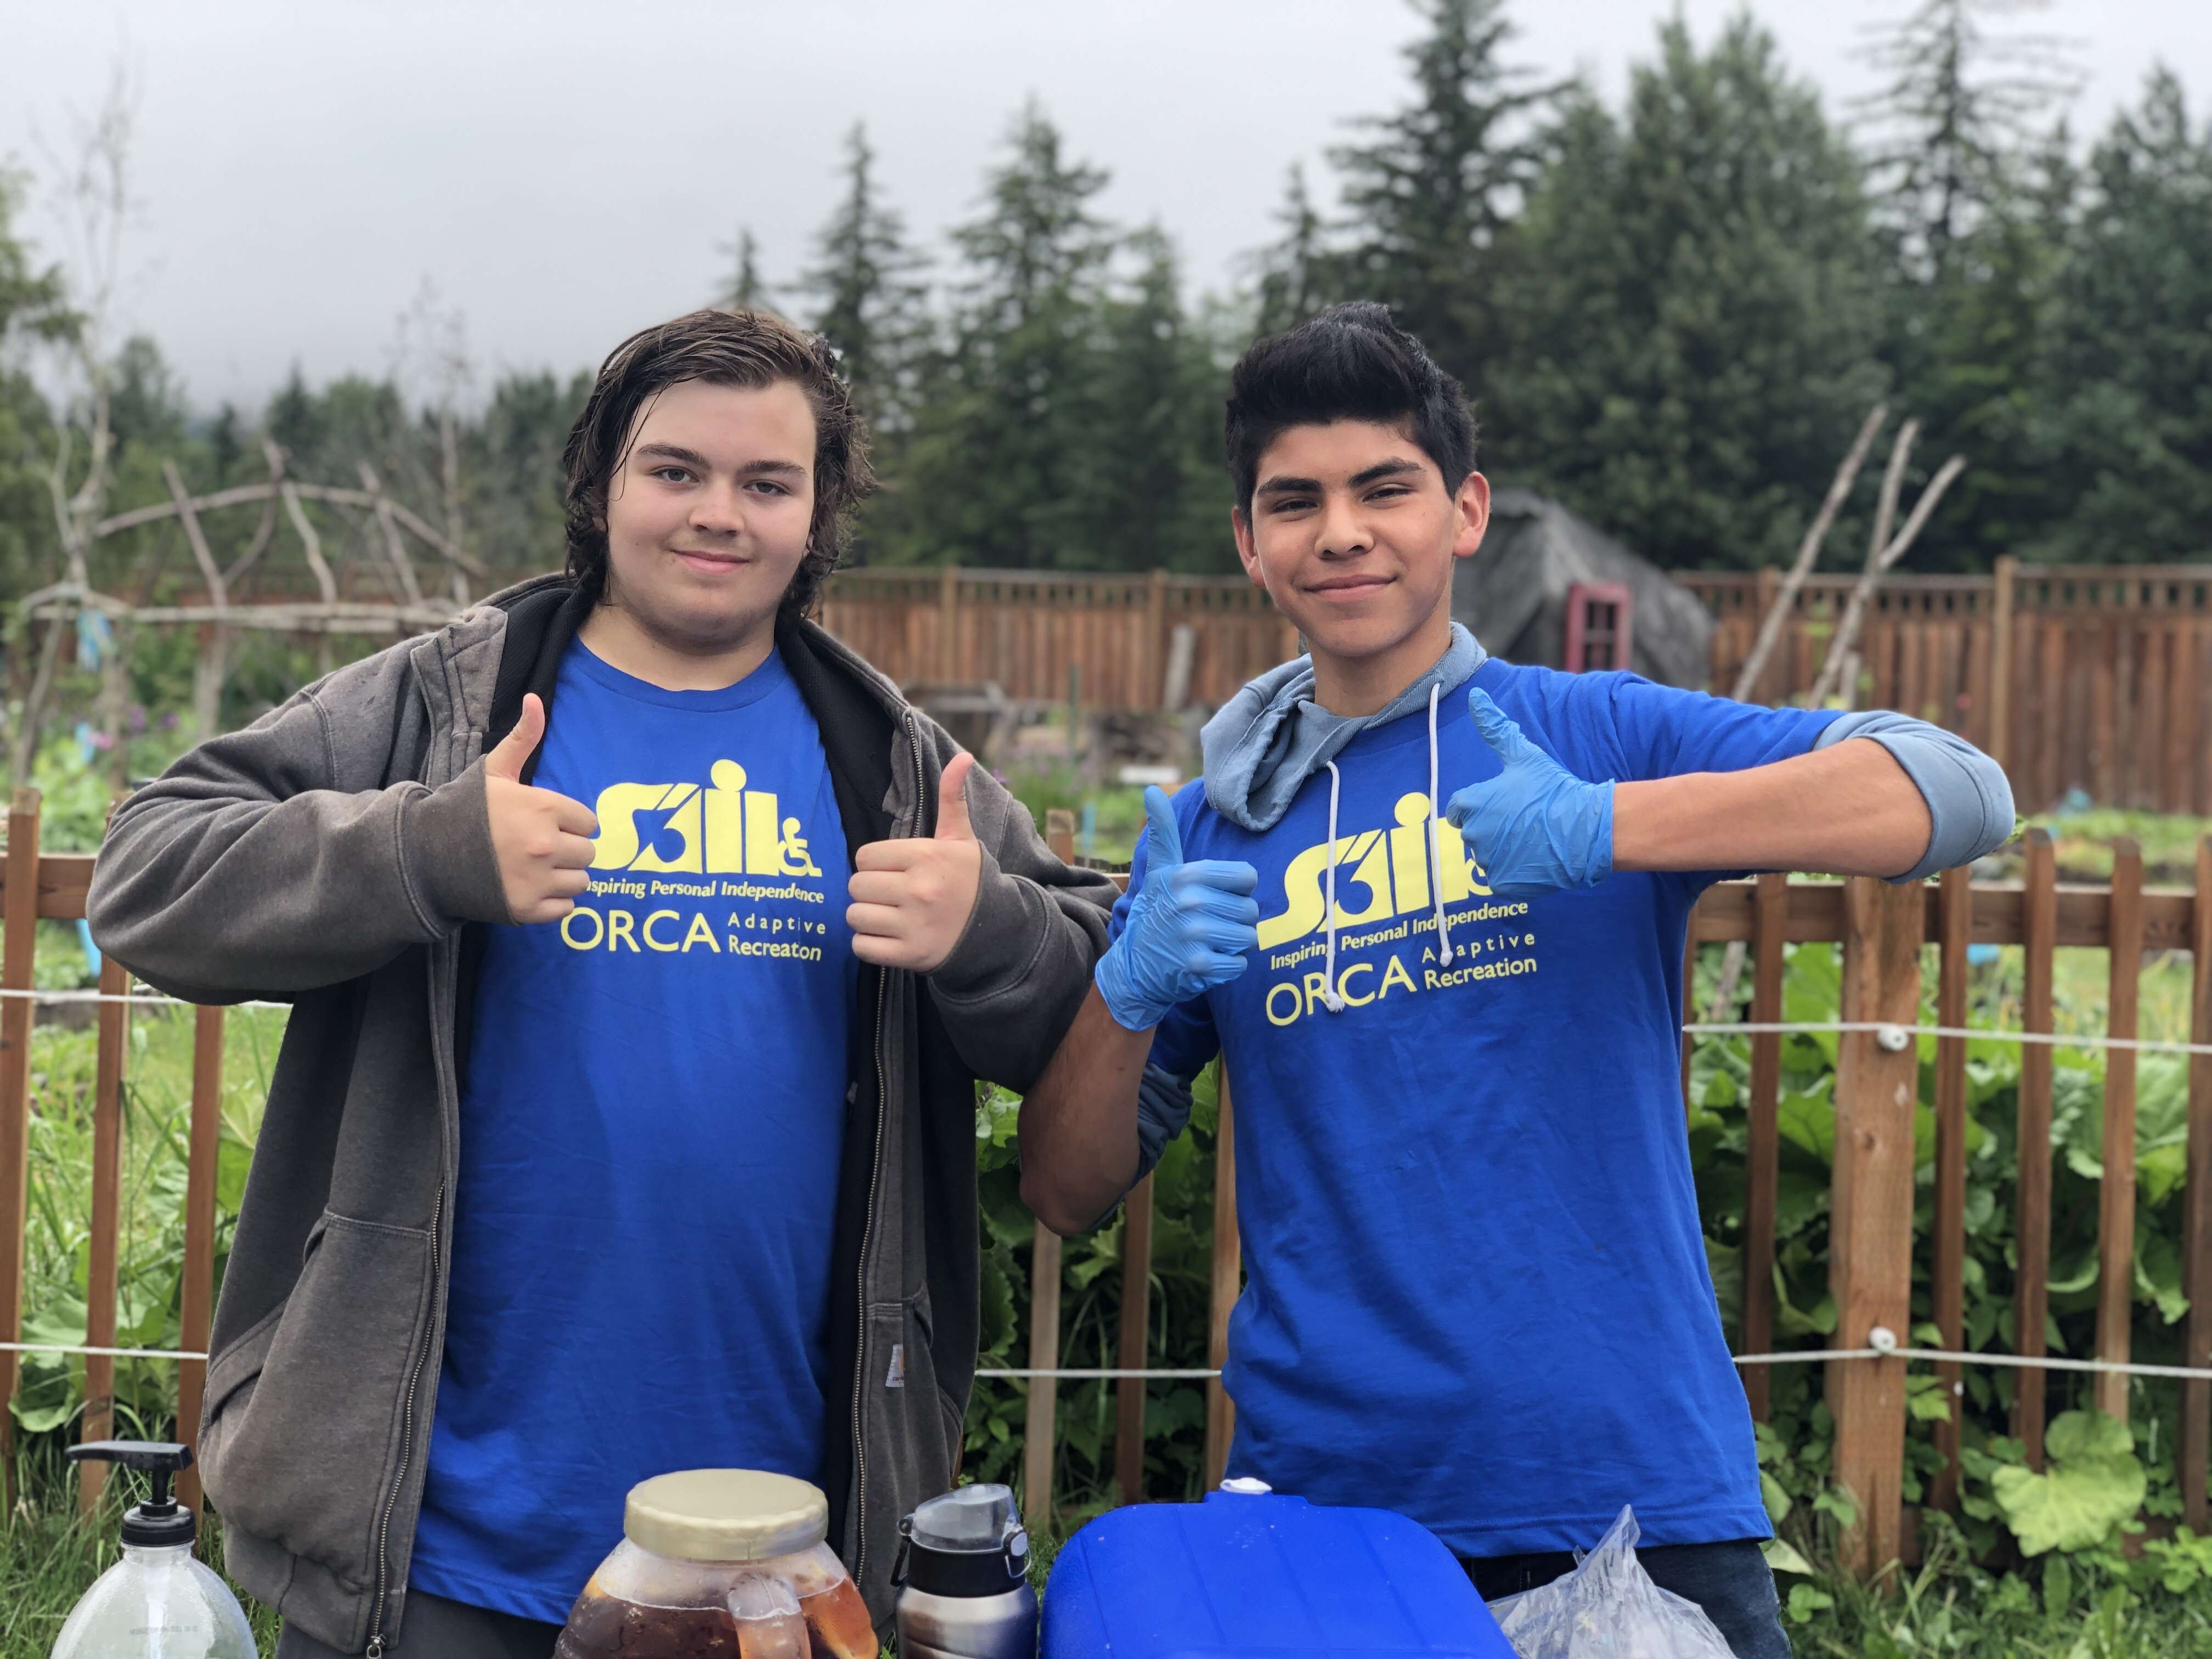 two young men wearing blue SAIL shirts posing with their thumbs up